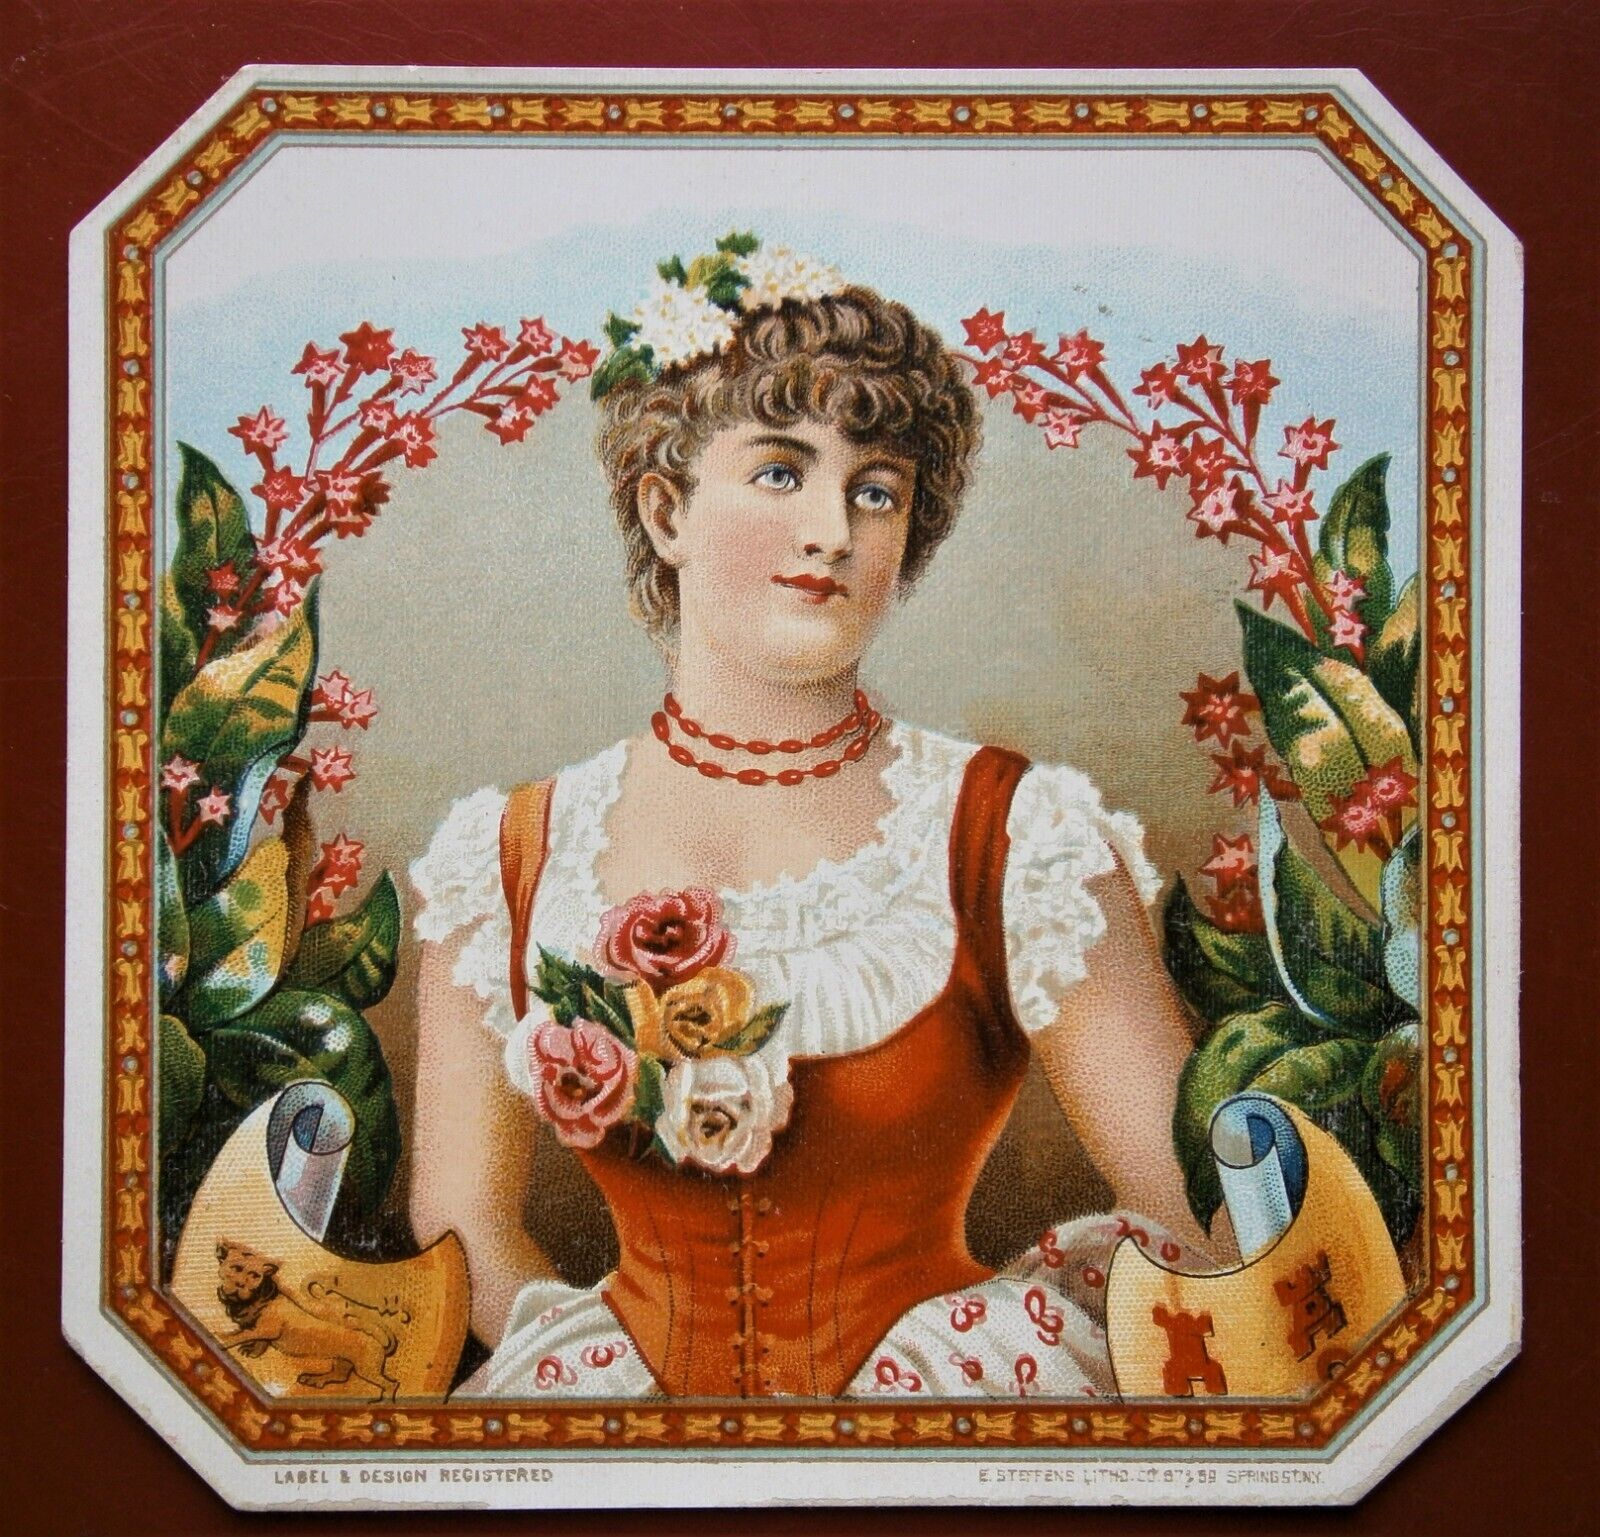 Generic Outer Cigar Label with Image of Young Woman with Flowers, early 1900's